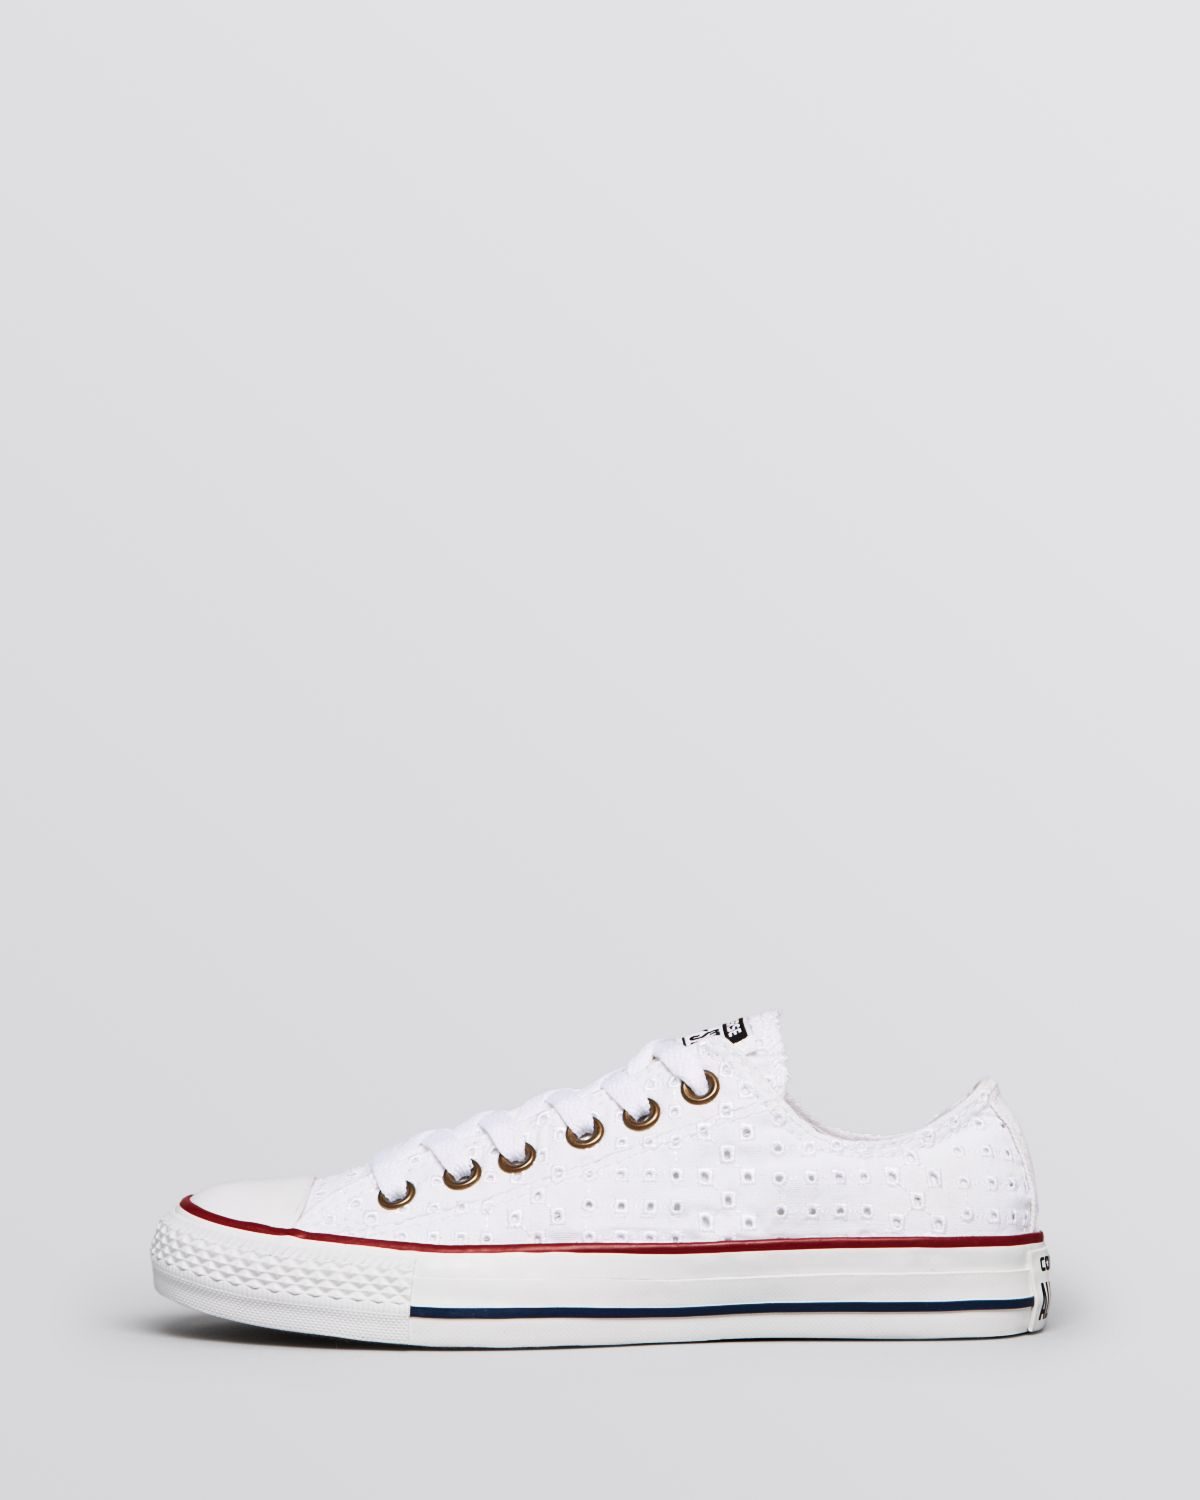 Lyst - Converse Lace Up Low Top Sneakers Chuck Taylor All Star in White